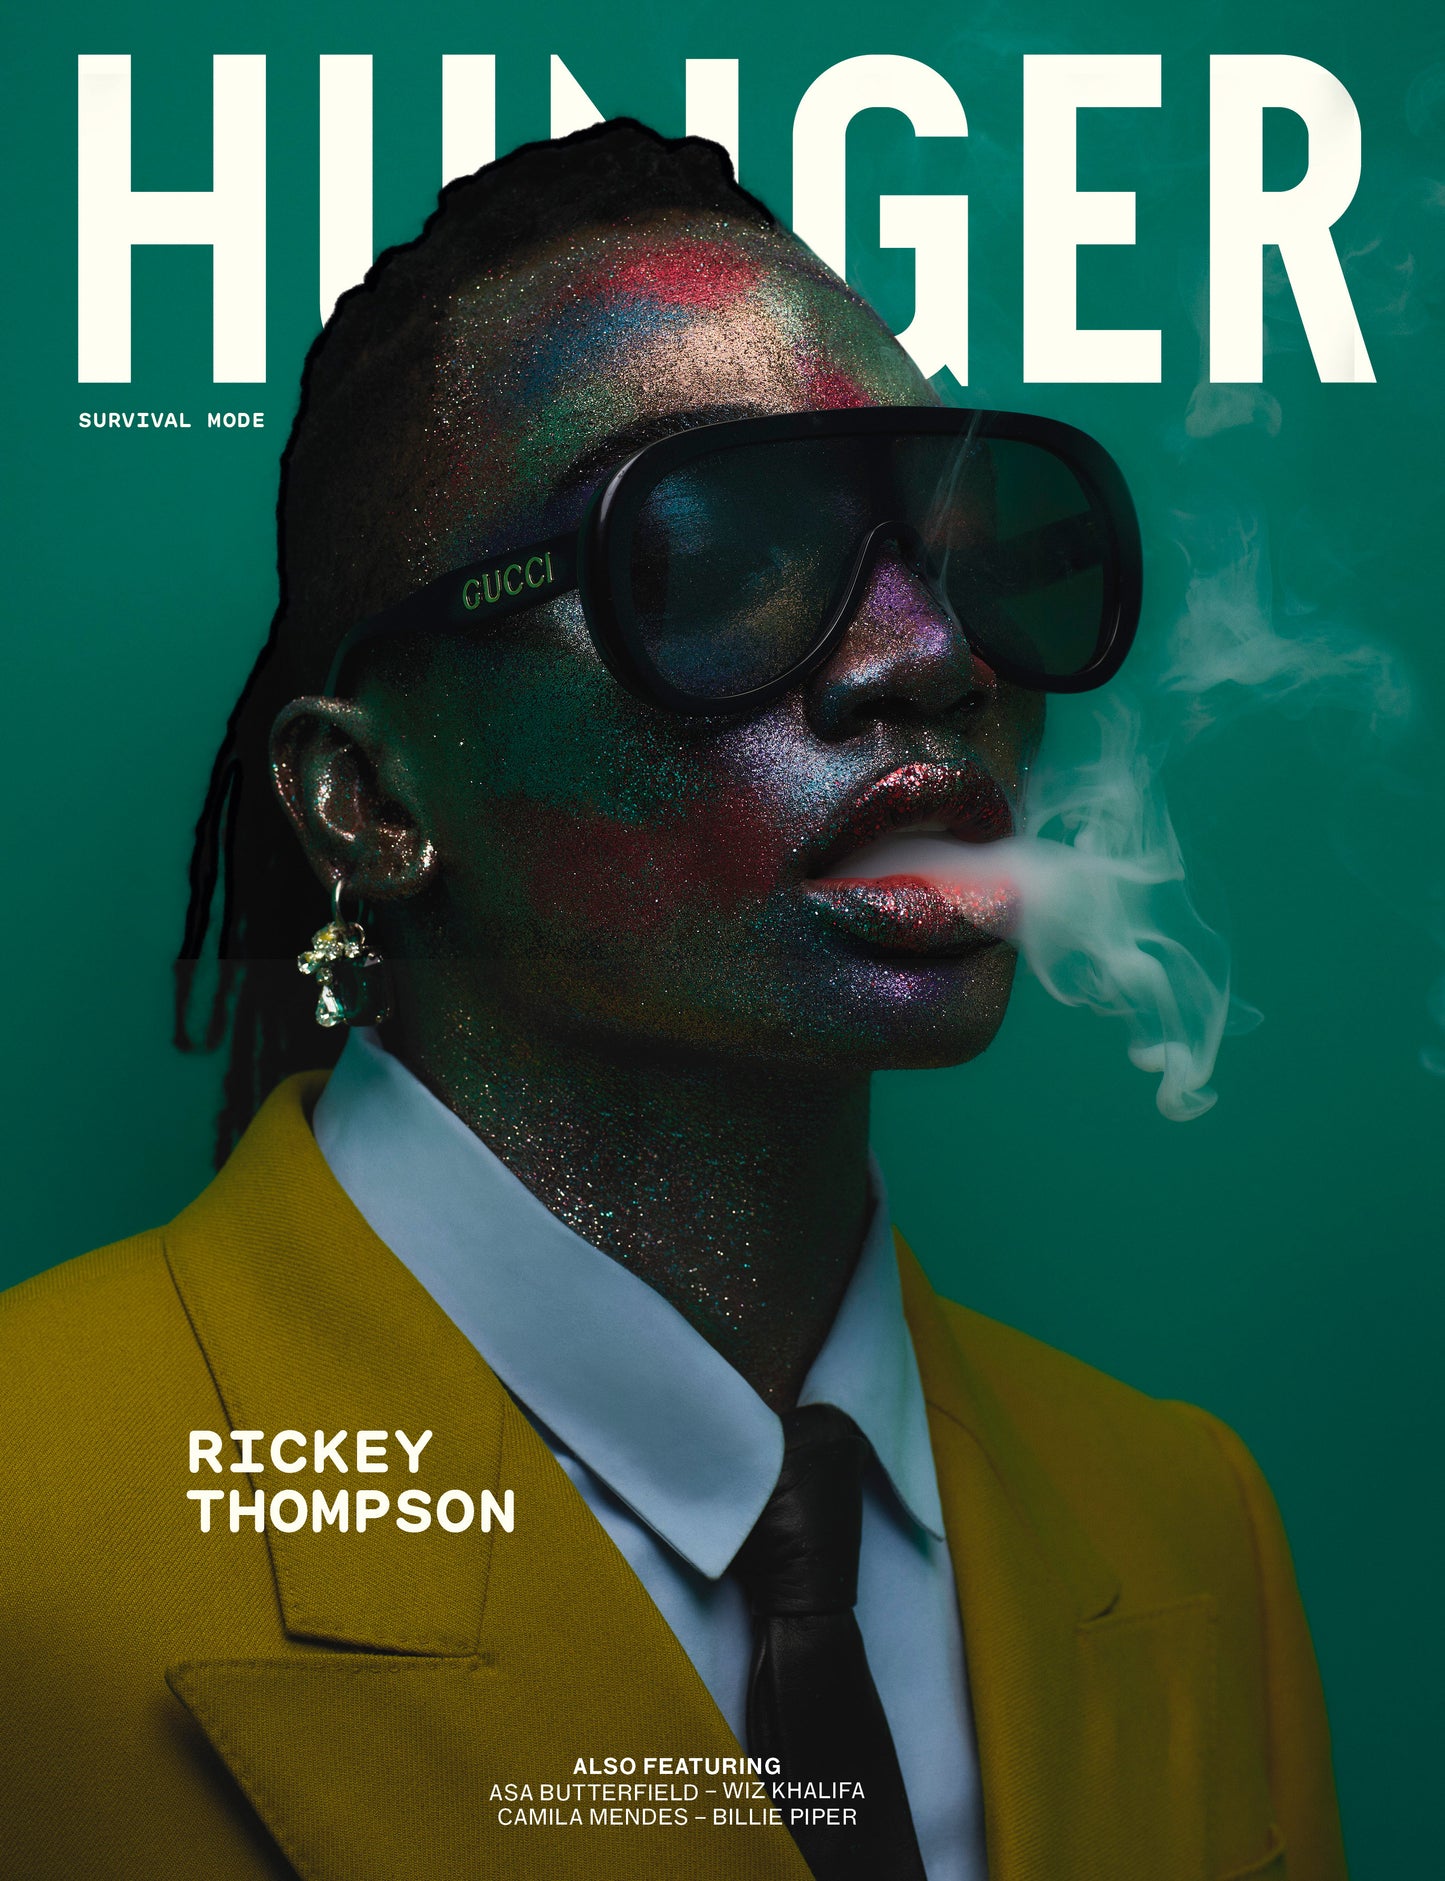 Rickey Thompson covers the Survival Mode issue